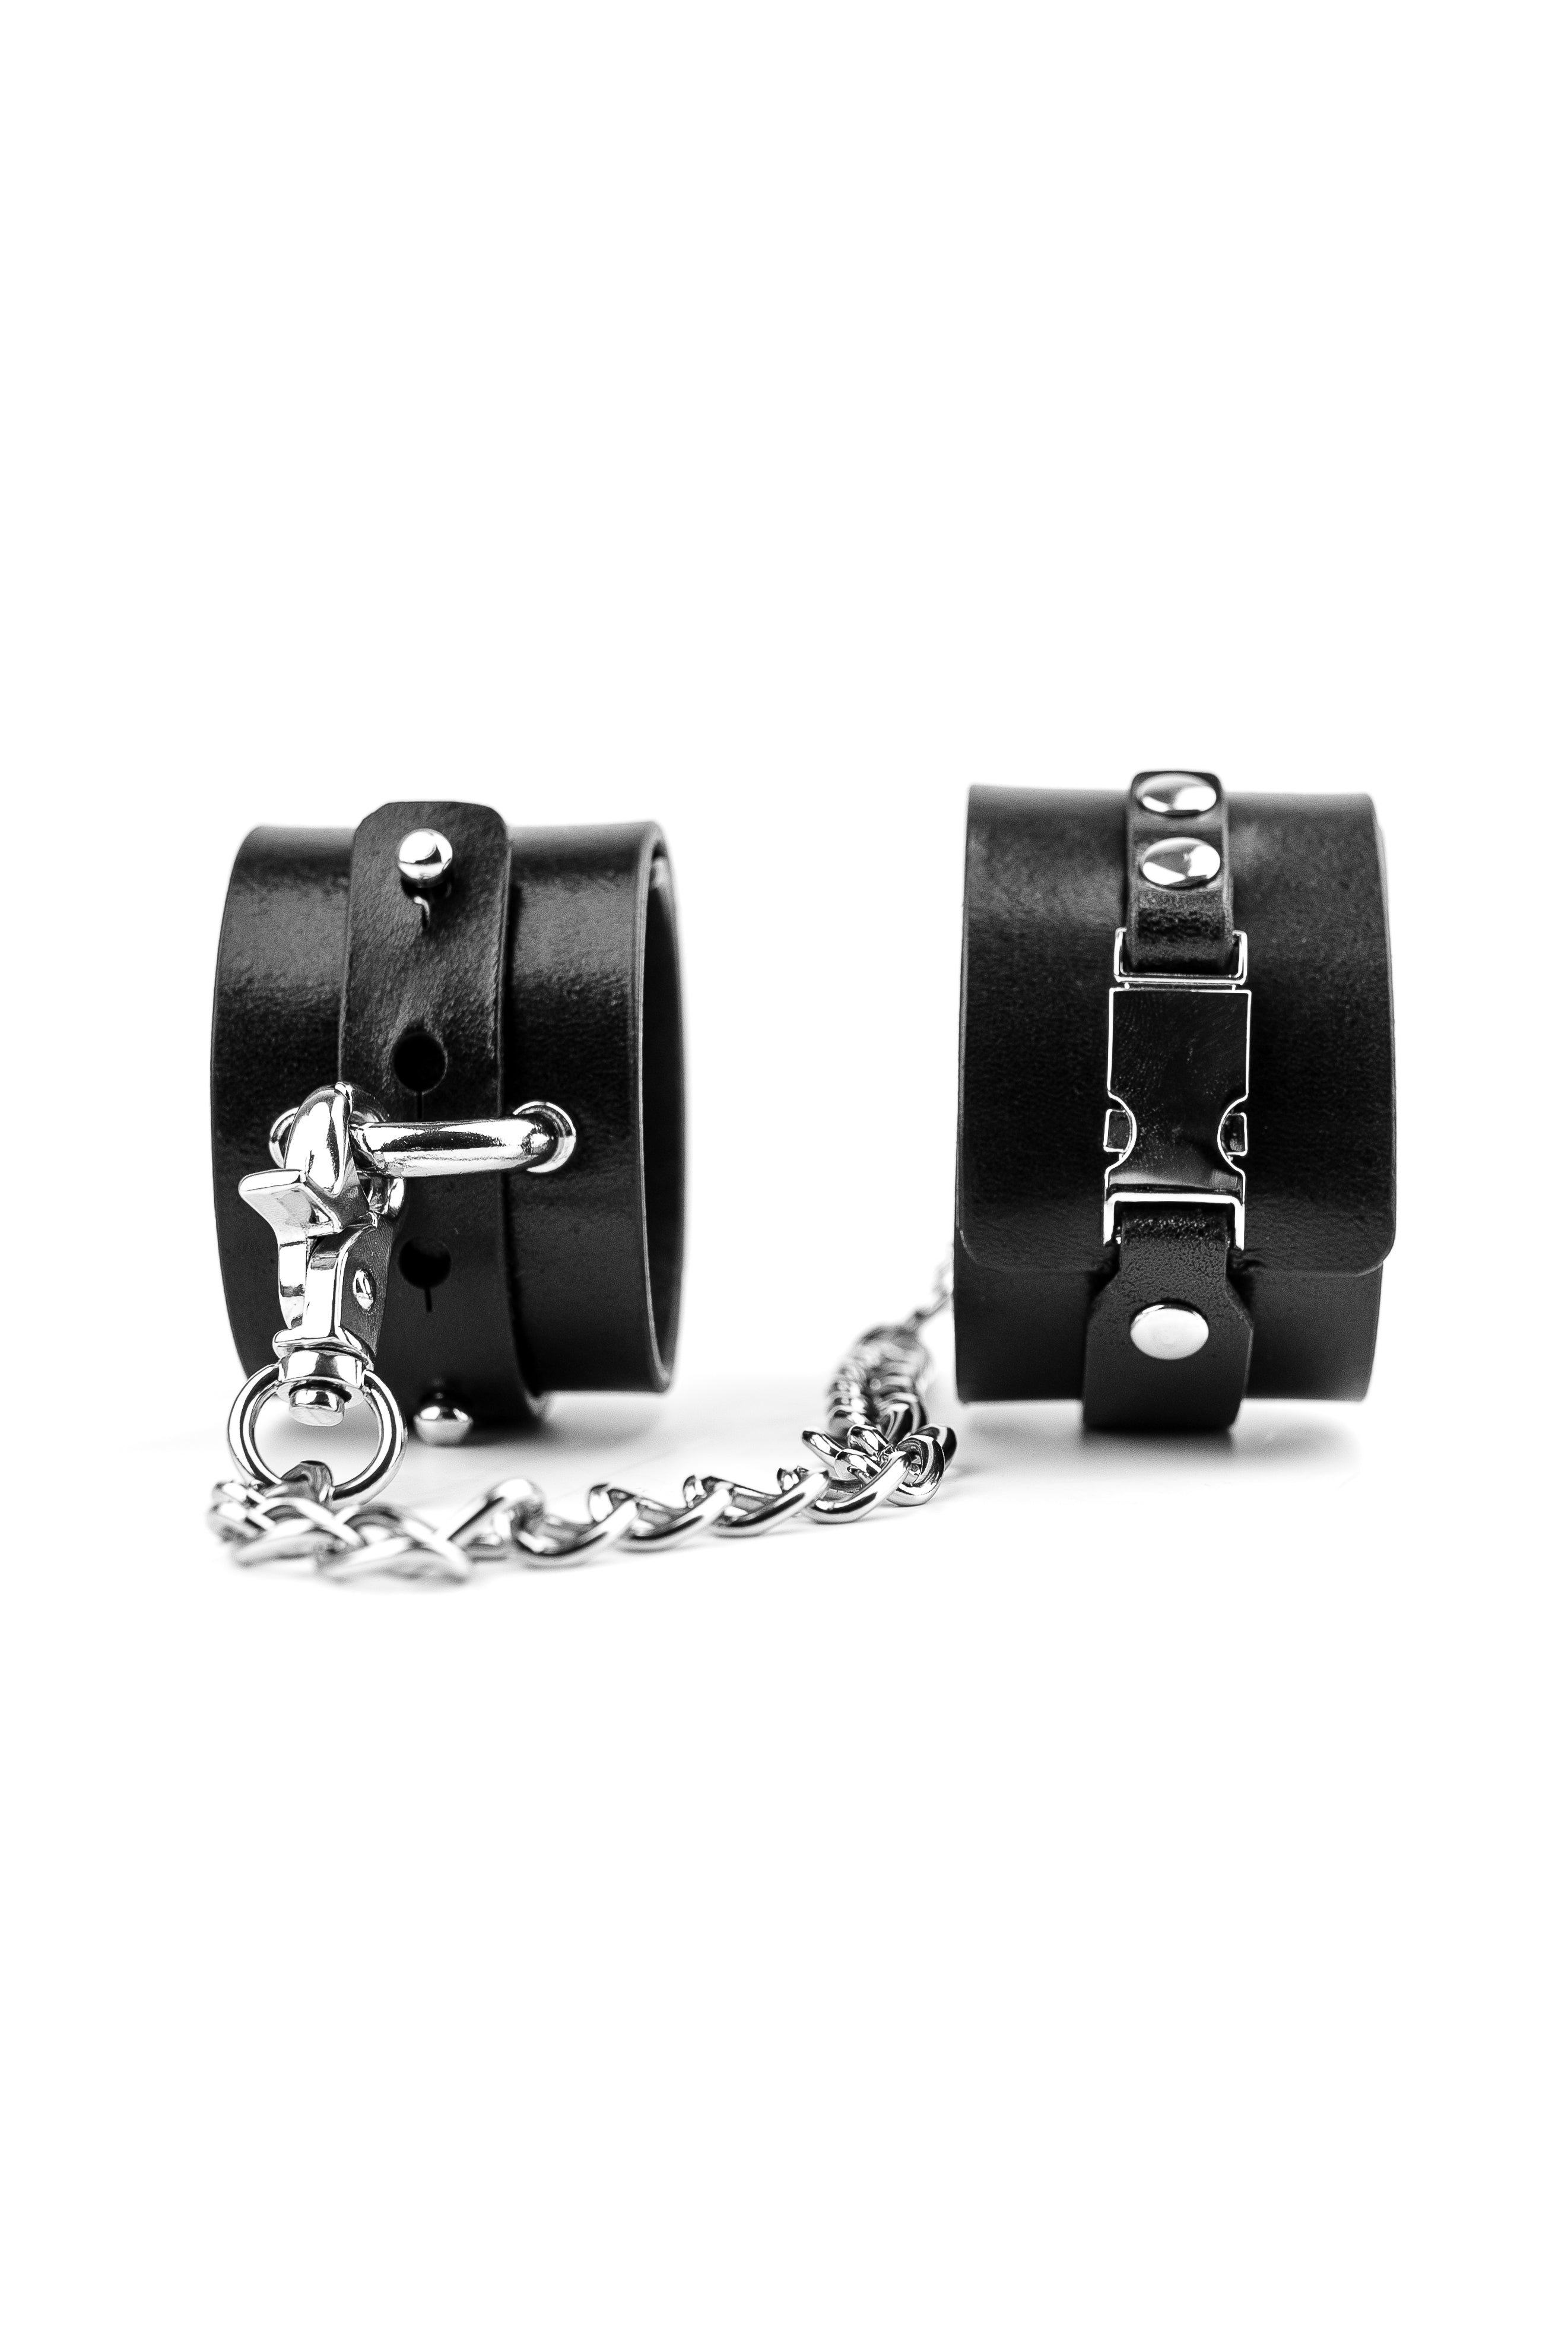 “Fast X me up” Handcuffs with chain connector